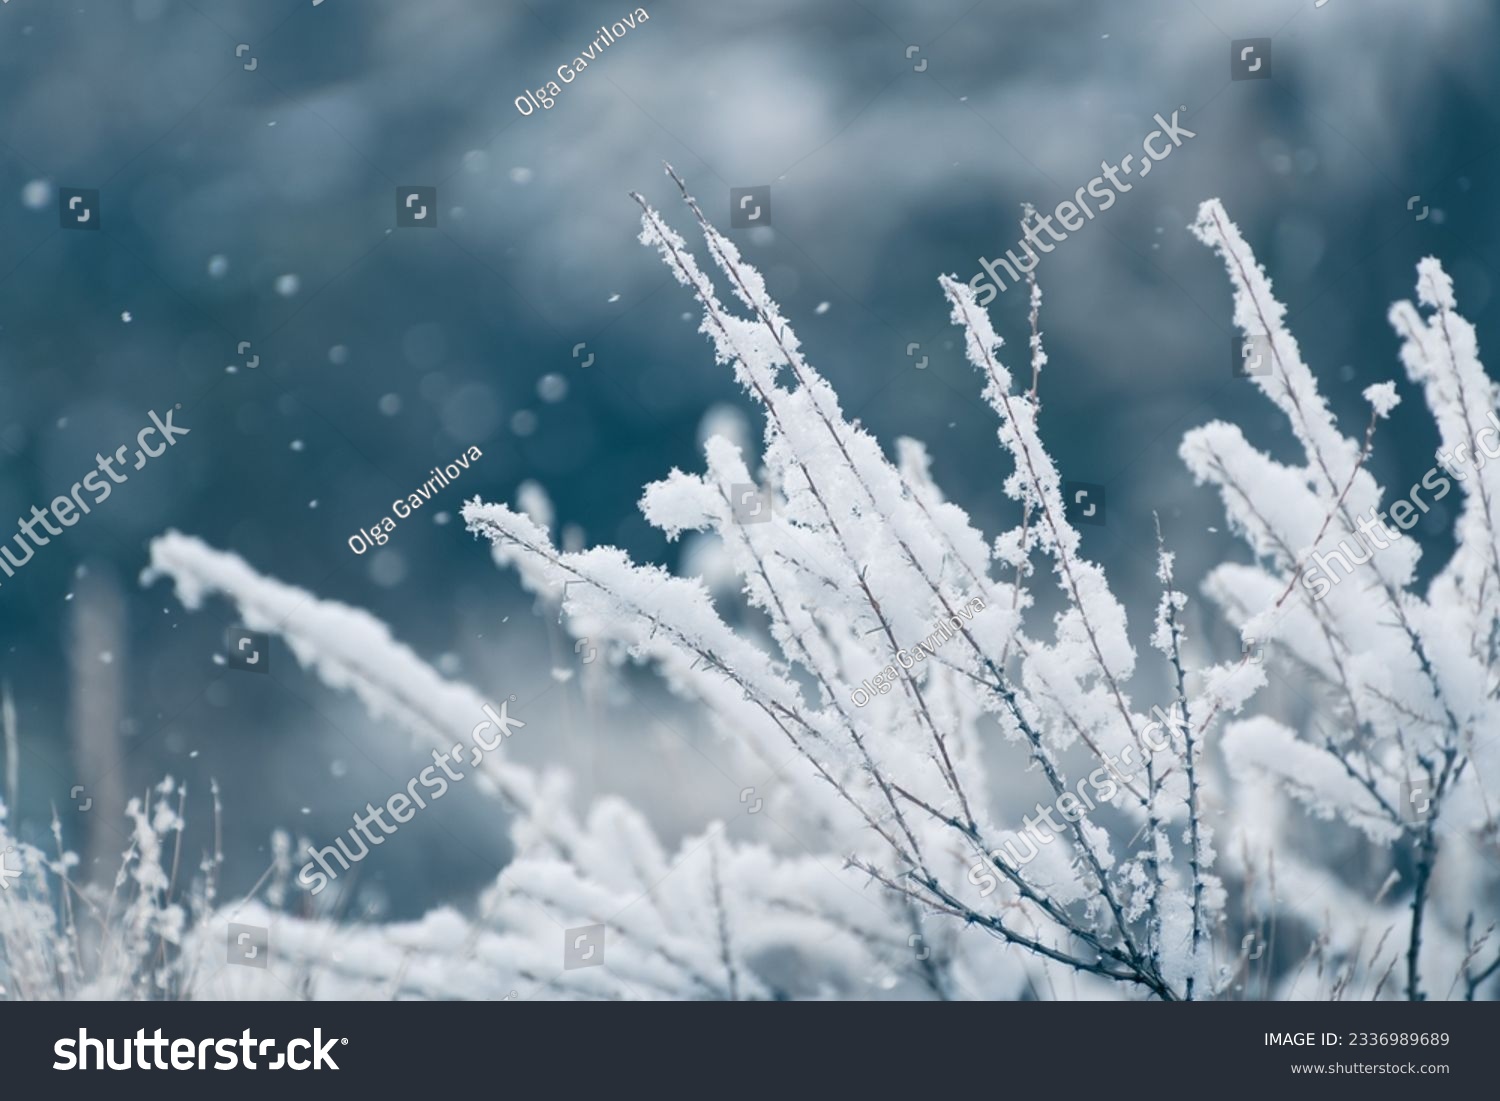 Snow-covered plants in winter forest during snowfall. Macro image, shallow depth of field. Winter nature background #2336989689